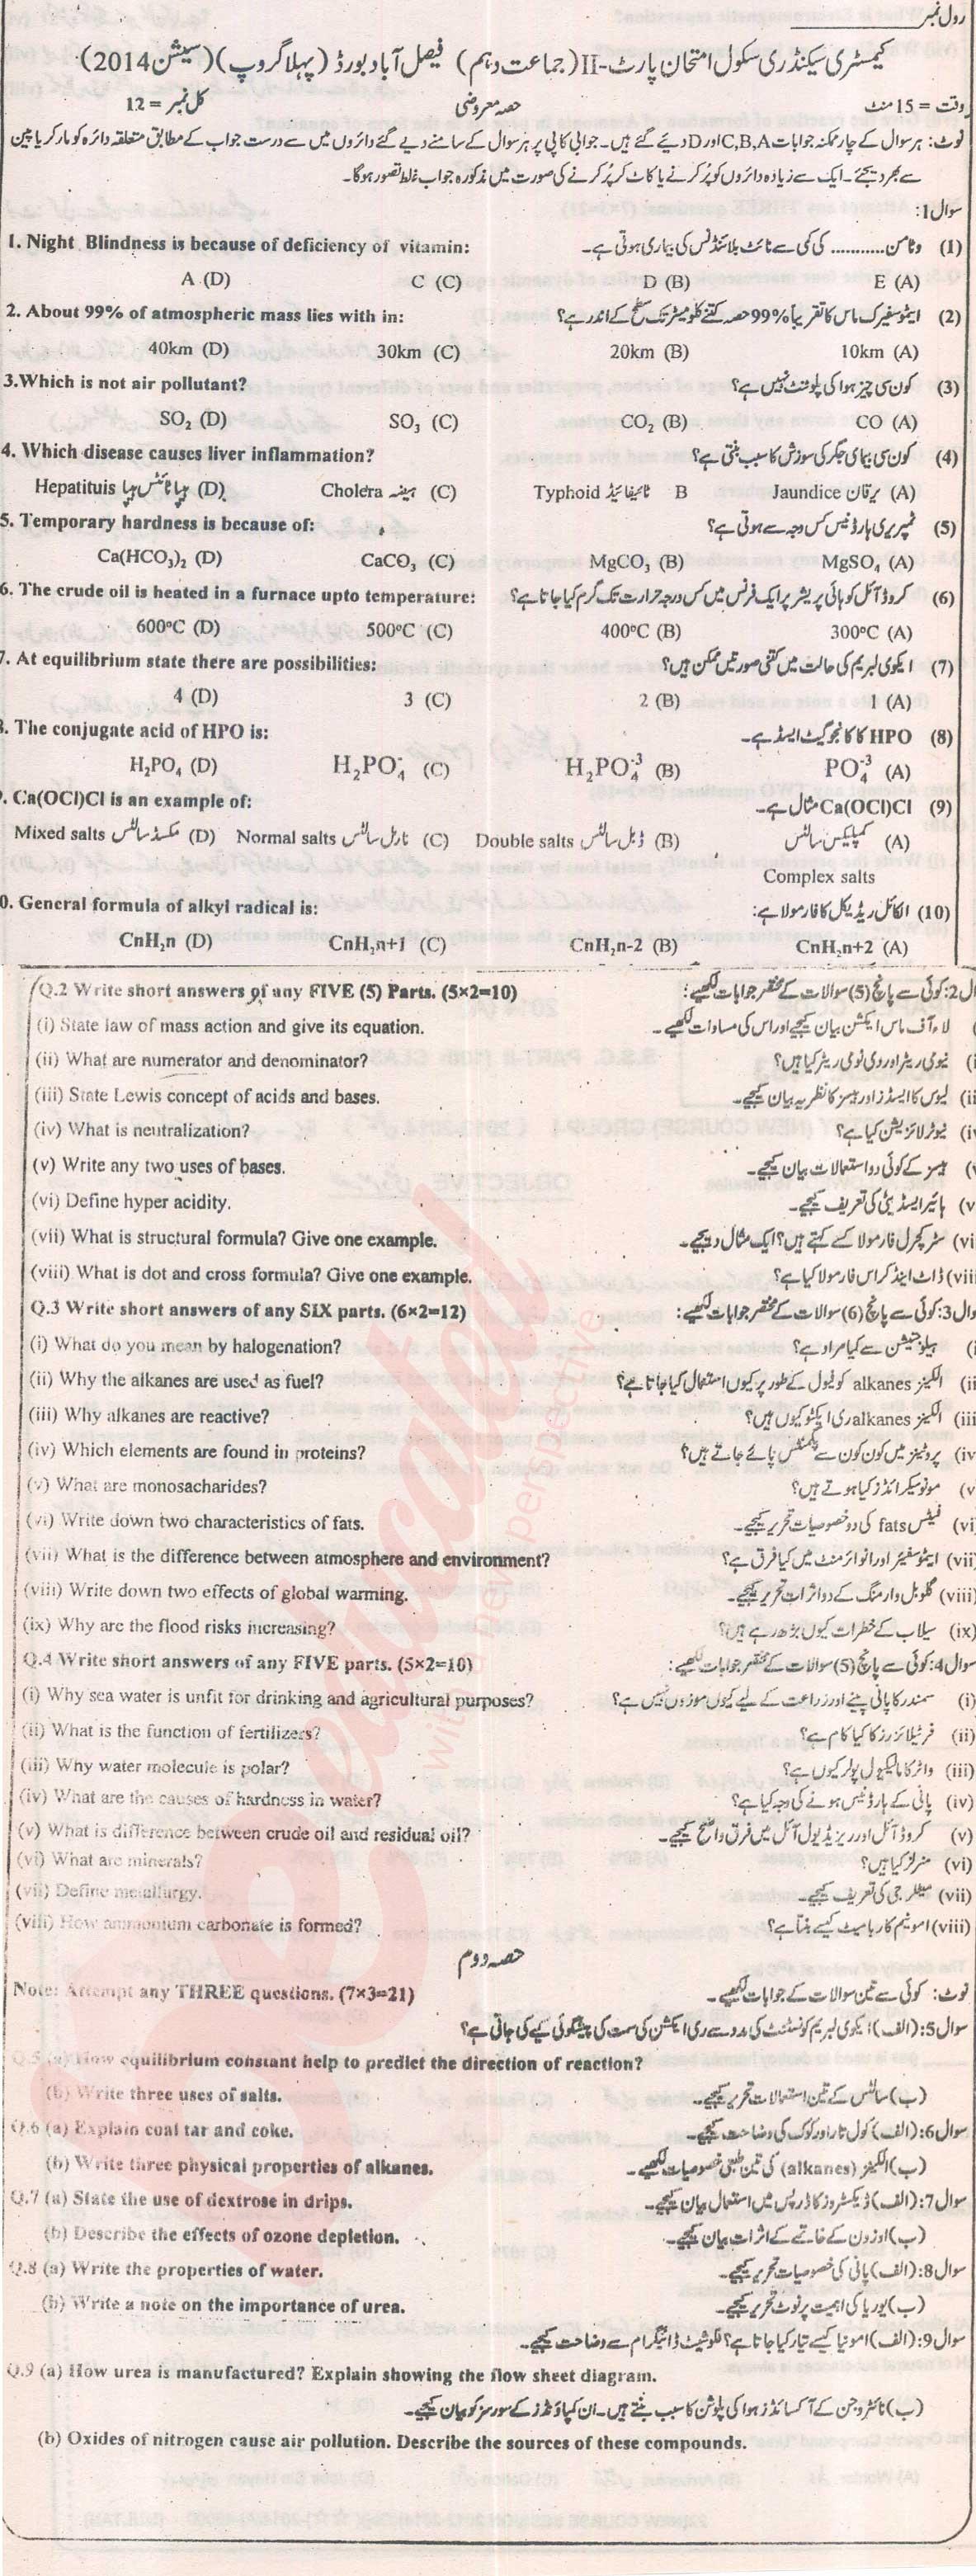 Chemistry 10th class Past Paper Group 1 BISE Faisalabad 2014